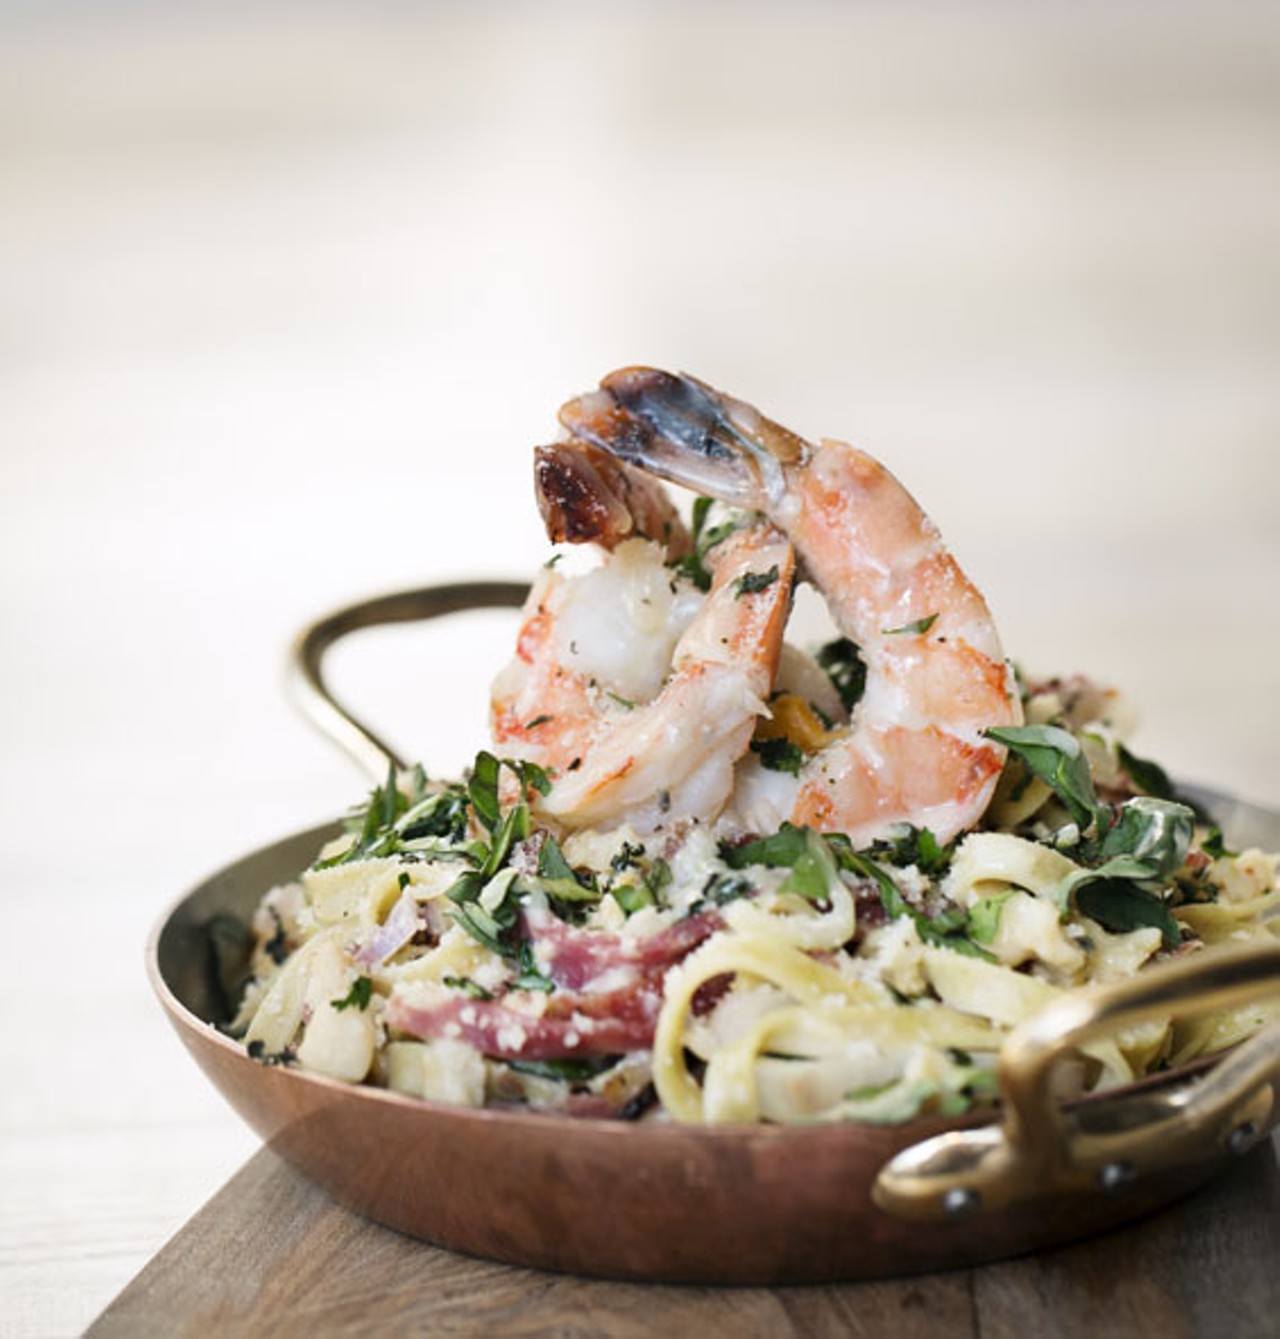 The "Linguini with Shrimp & Clams" is made with soppressata and hot chile flakes.